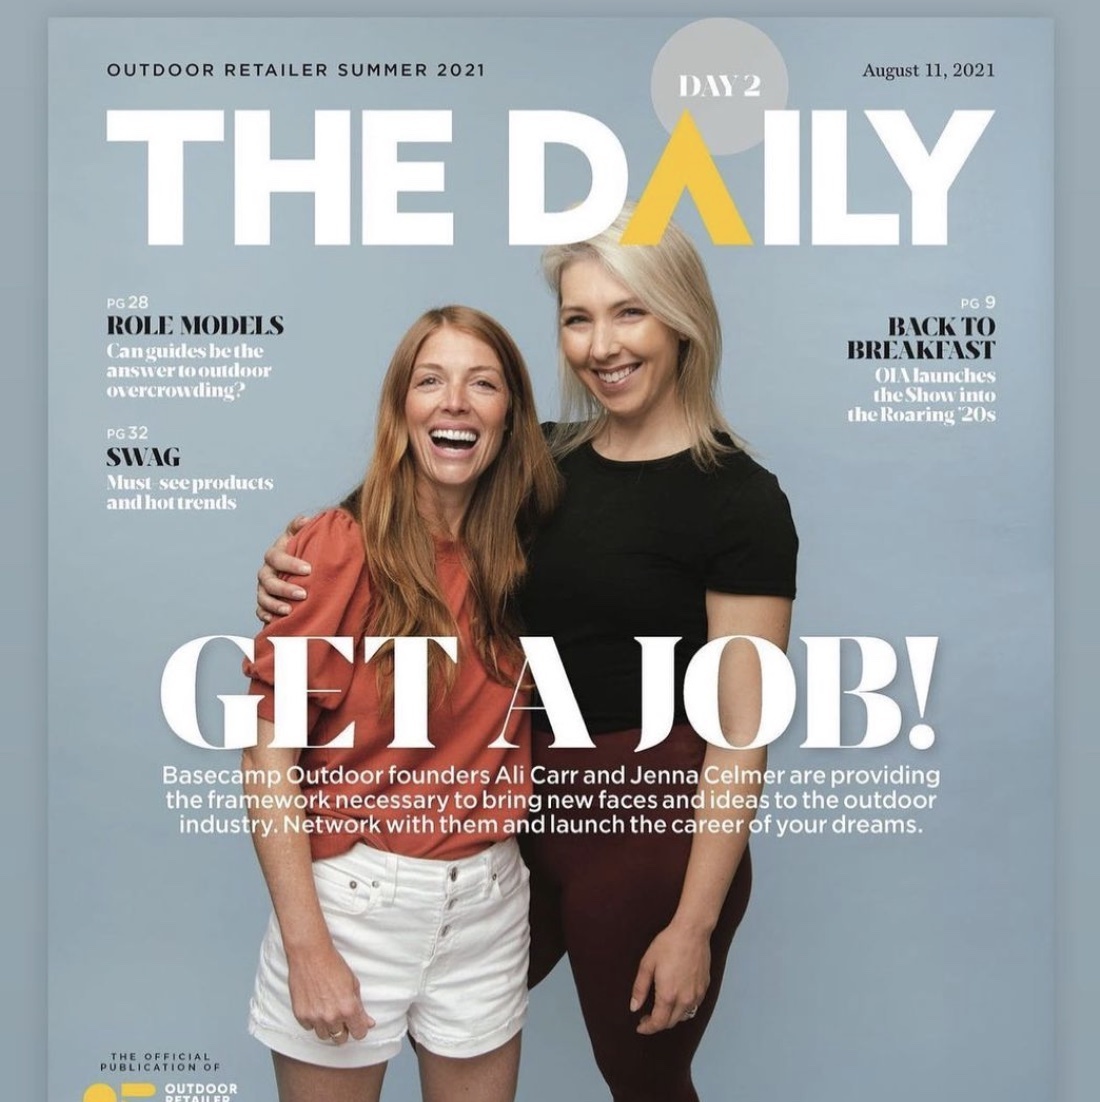 Ali Carr and Jenna Celmer of Basecamp Outdoors on the cover of a magazine called The Daily 